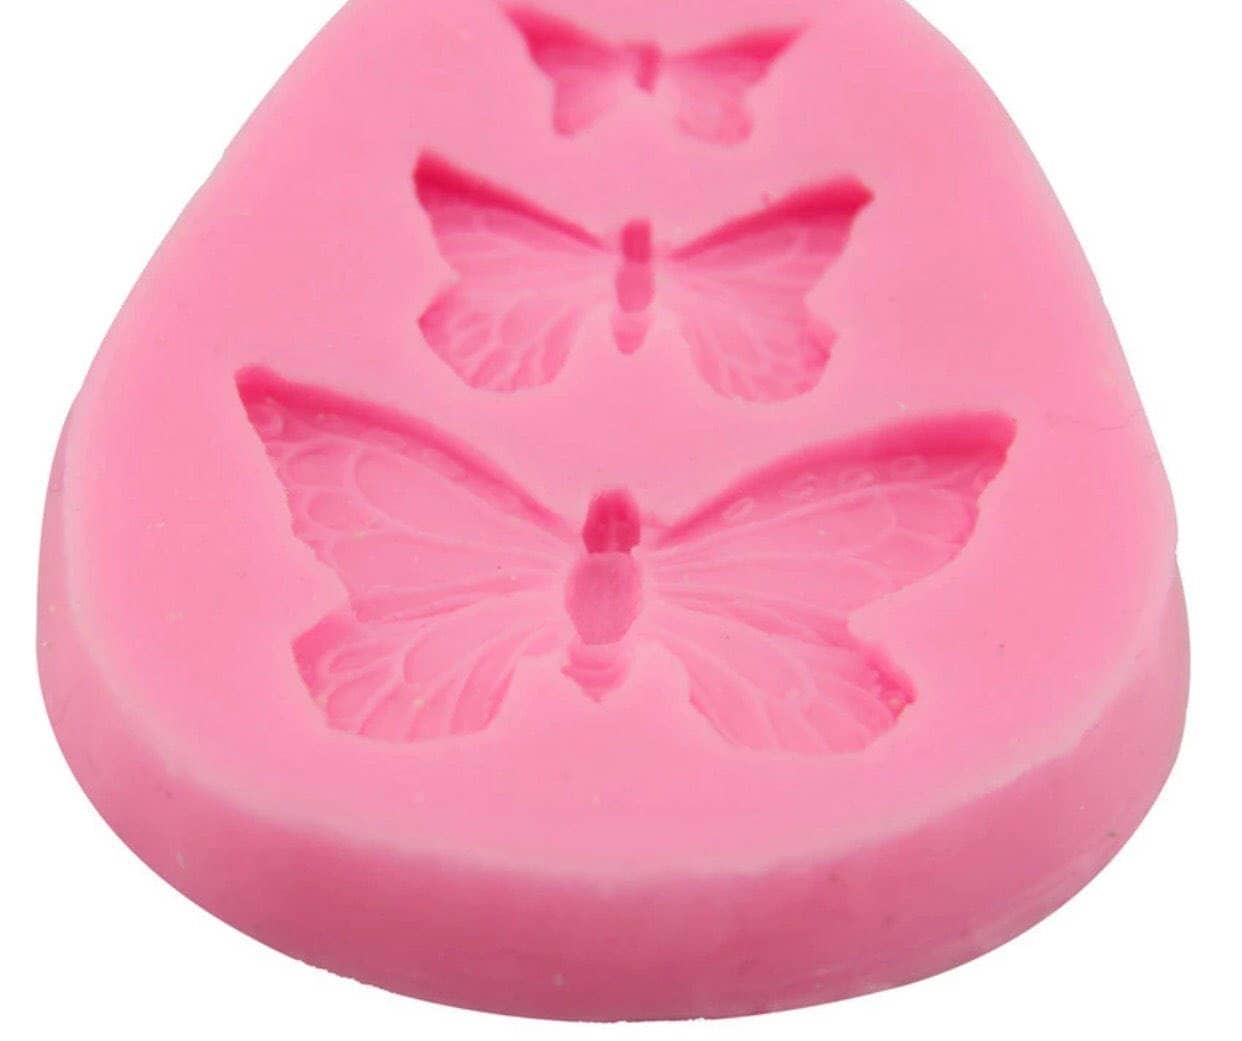 3-Hole Butterfly Silicone Fondant Mold